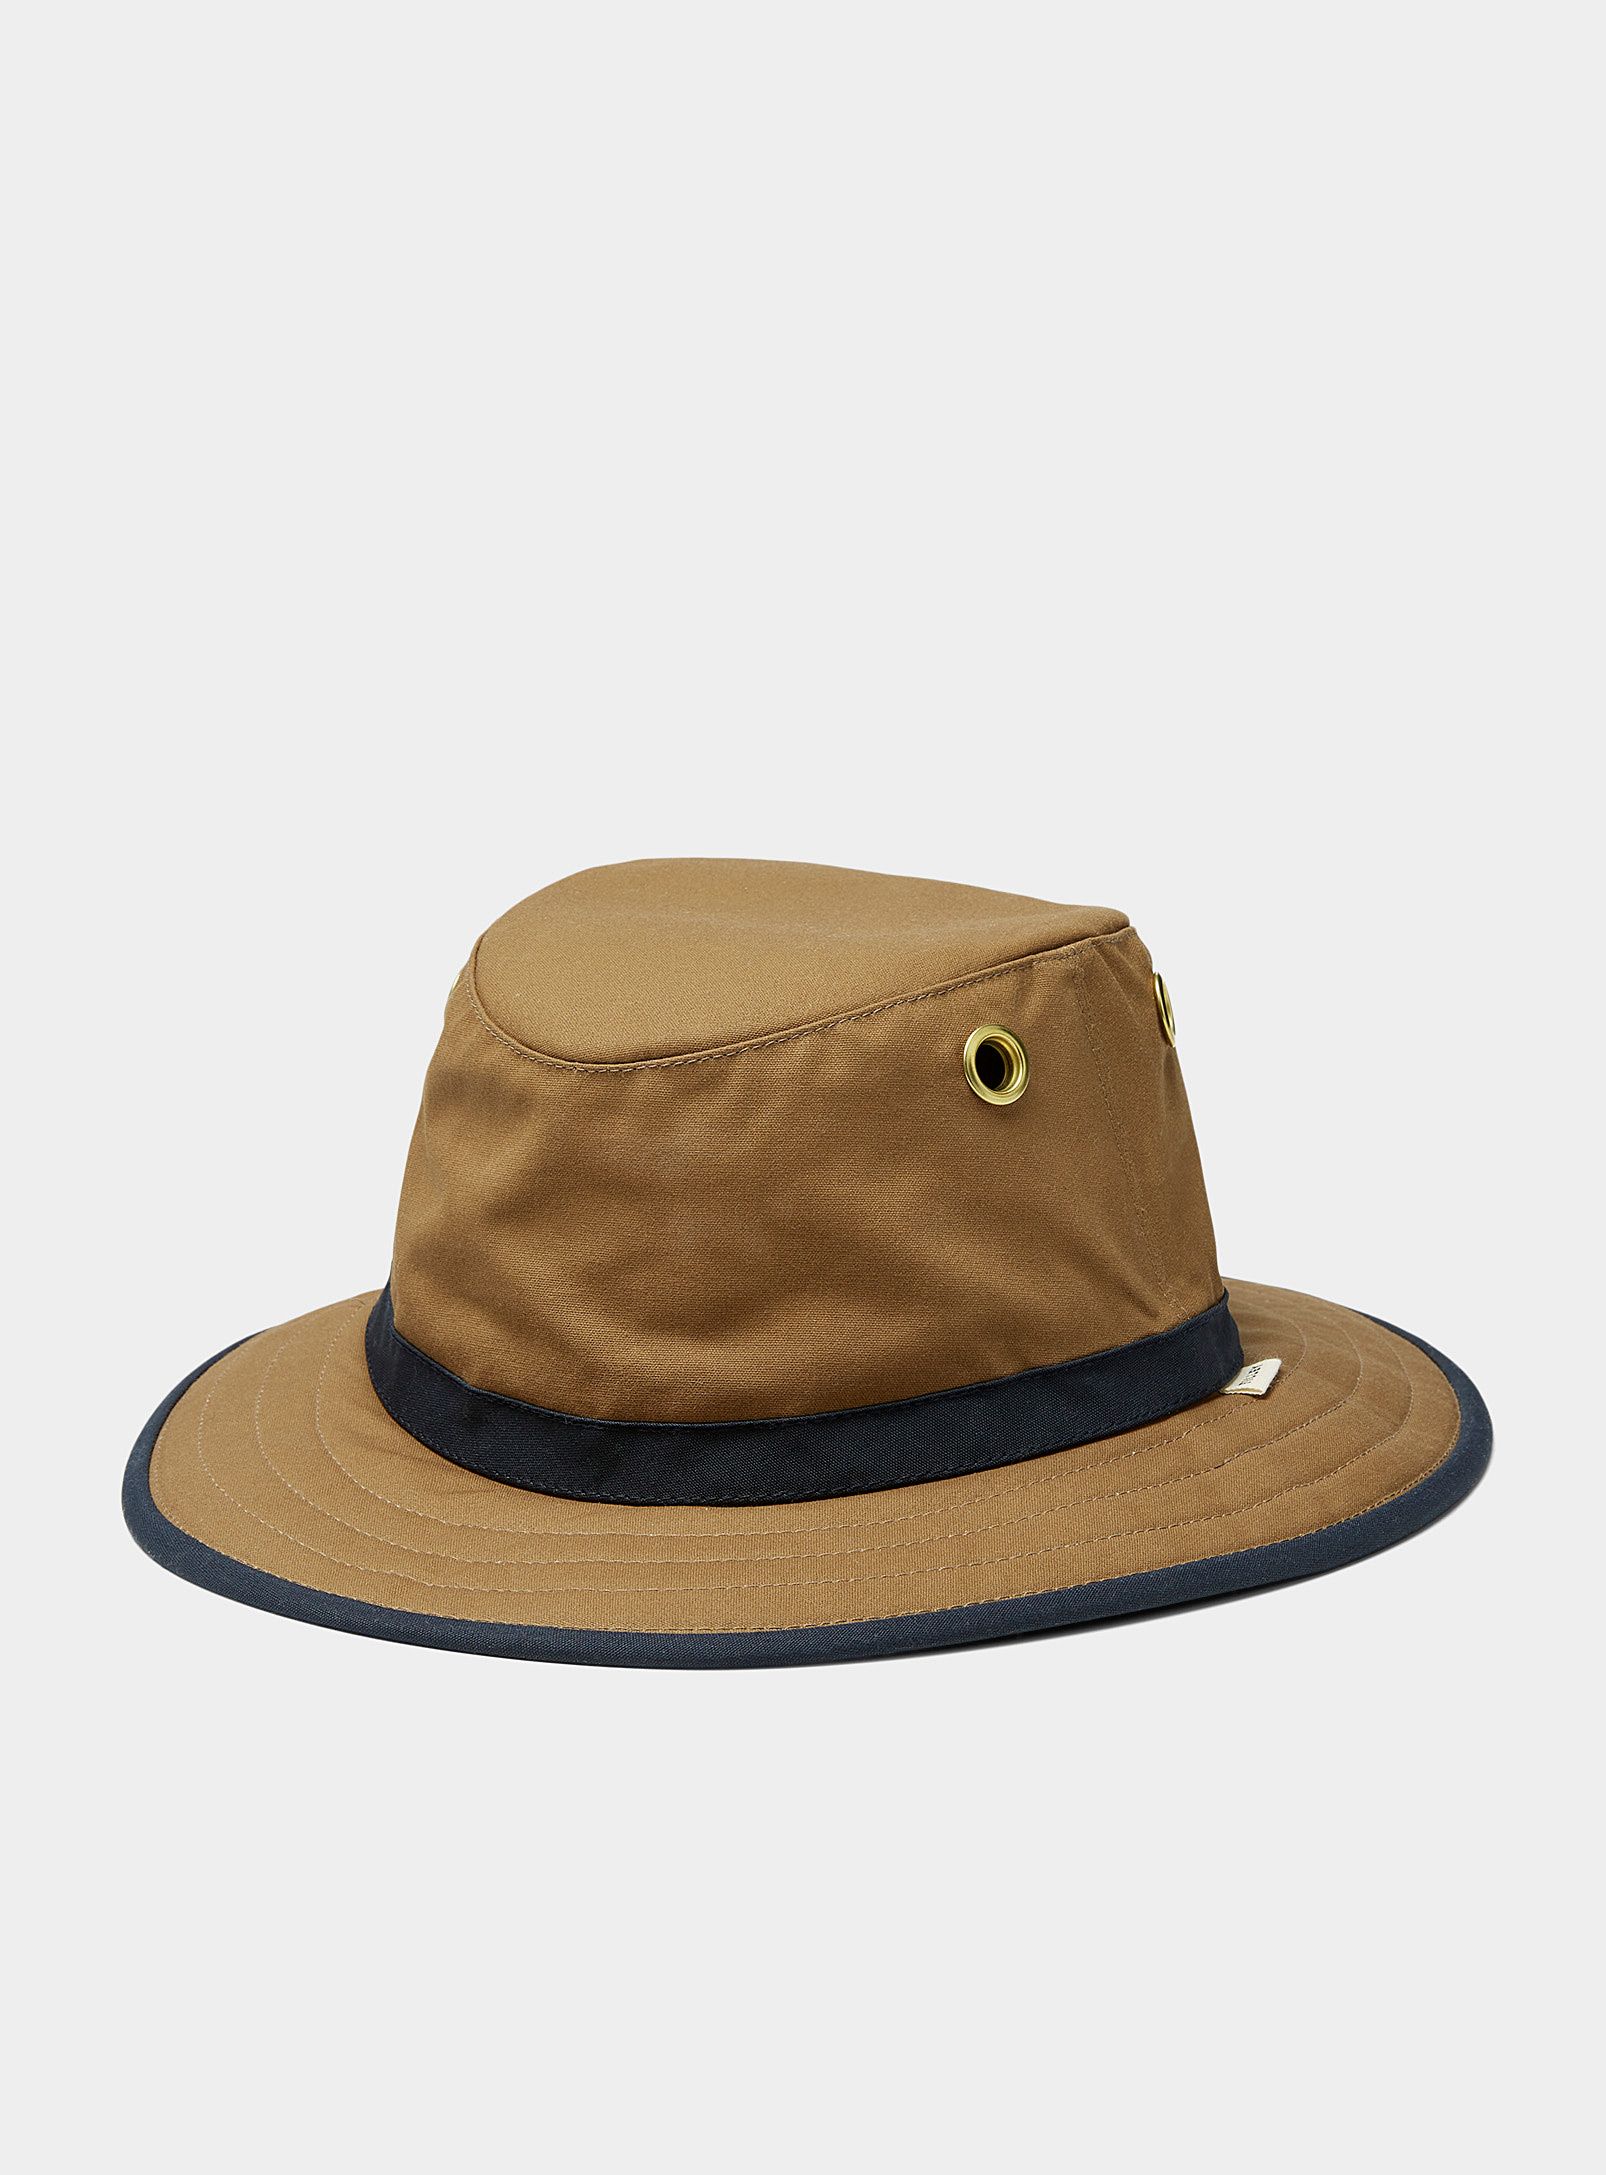 Tilley - Men's Waxed cotton Outback hat